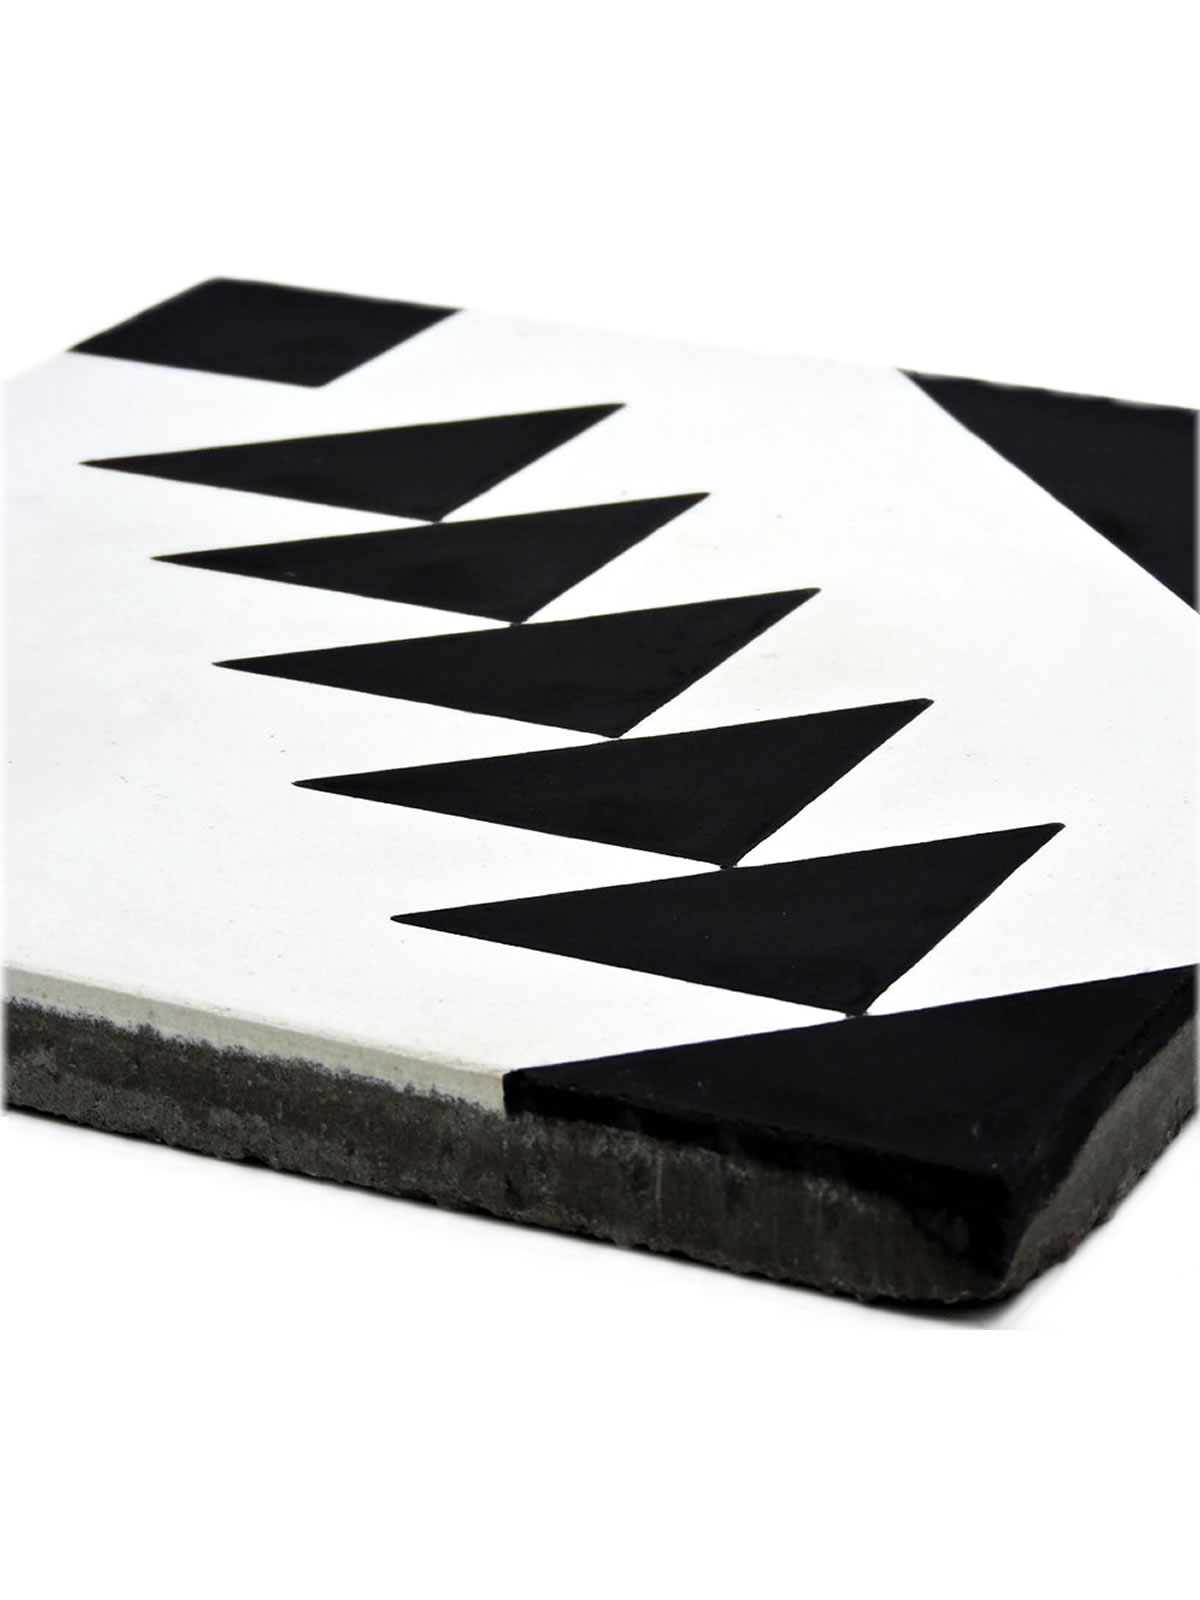 Moroccan Handmade Cement Tiles 8 Inch x 8 Inch Black And White, Walili ...